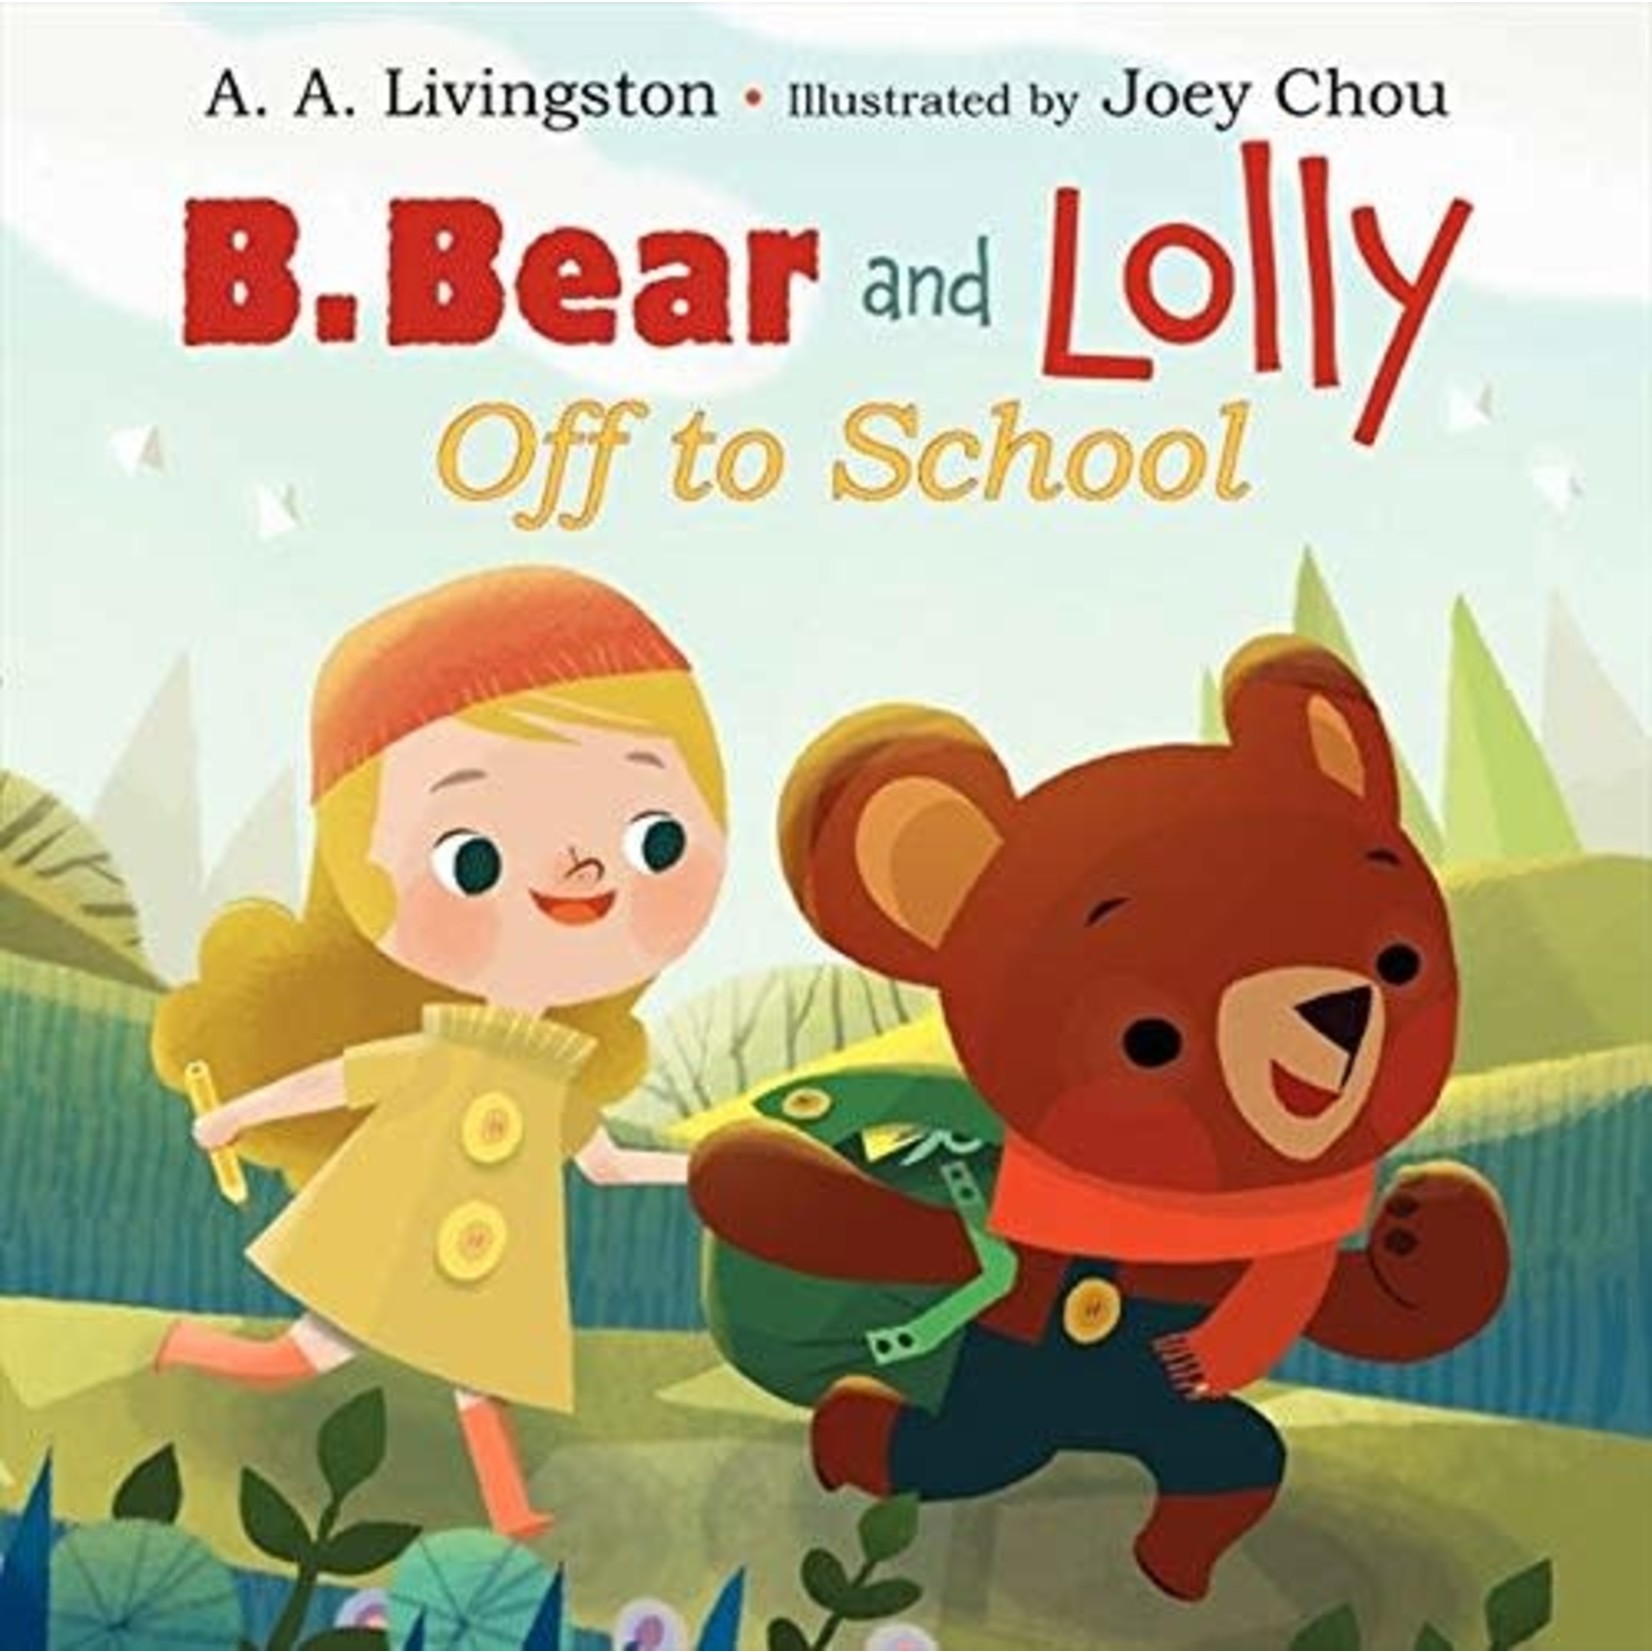 A.A. Livingston B.Bear and Lolly Off to School